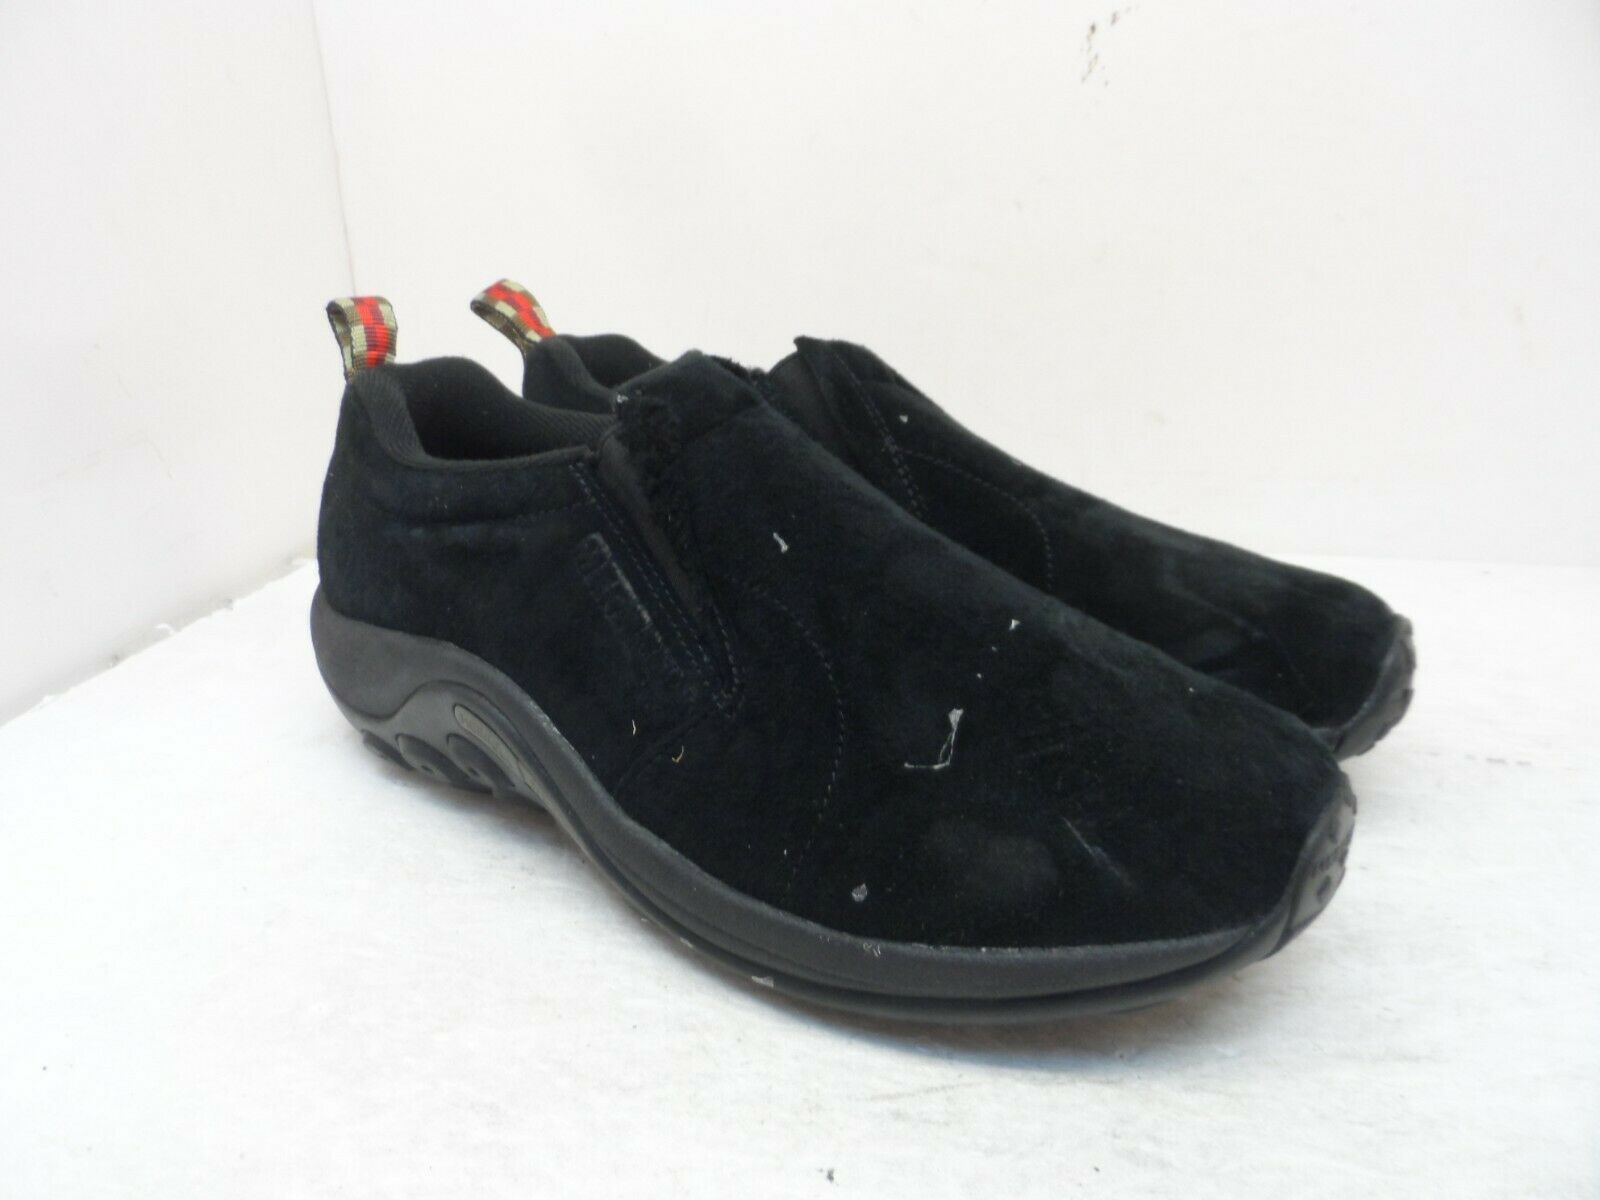 Primary image for Merrell Men's Jungle Moc Nubuck Slip-On Work Shoes Midnight Size 10M